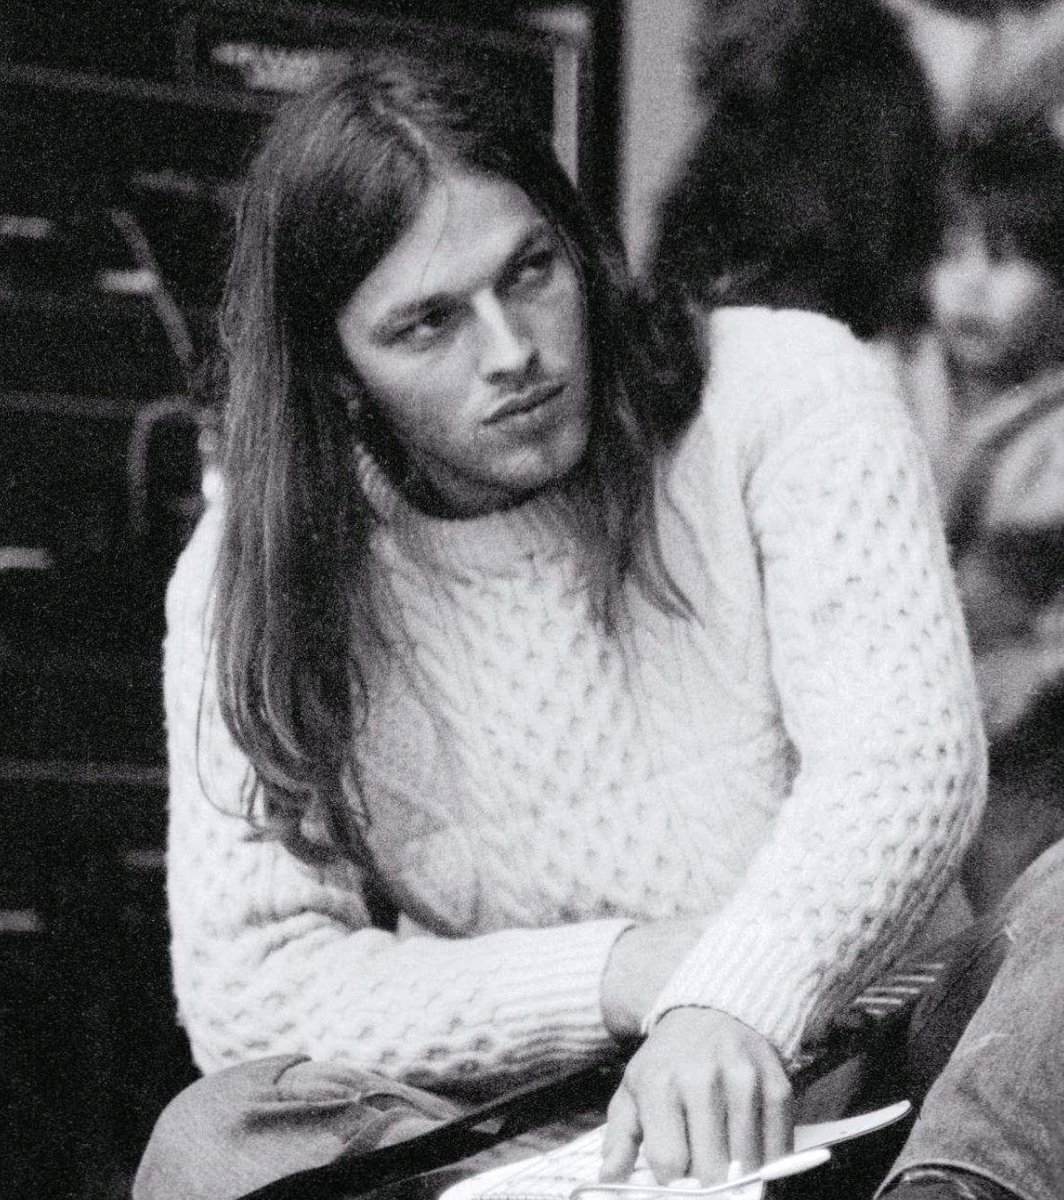 David Gilmour a veteran still in the pink  archive 1978  David Gilmour   The Guardian